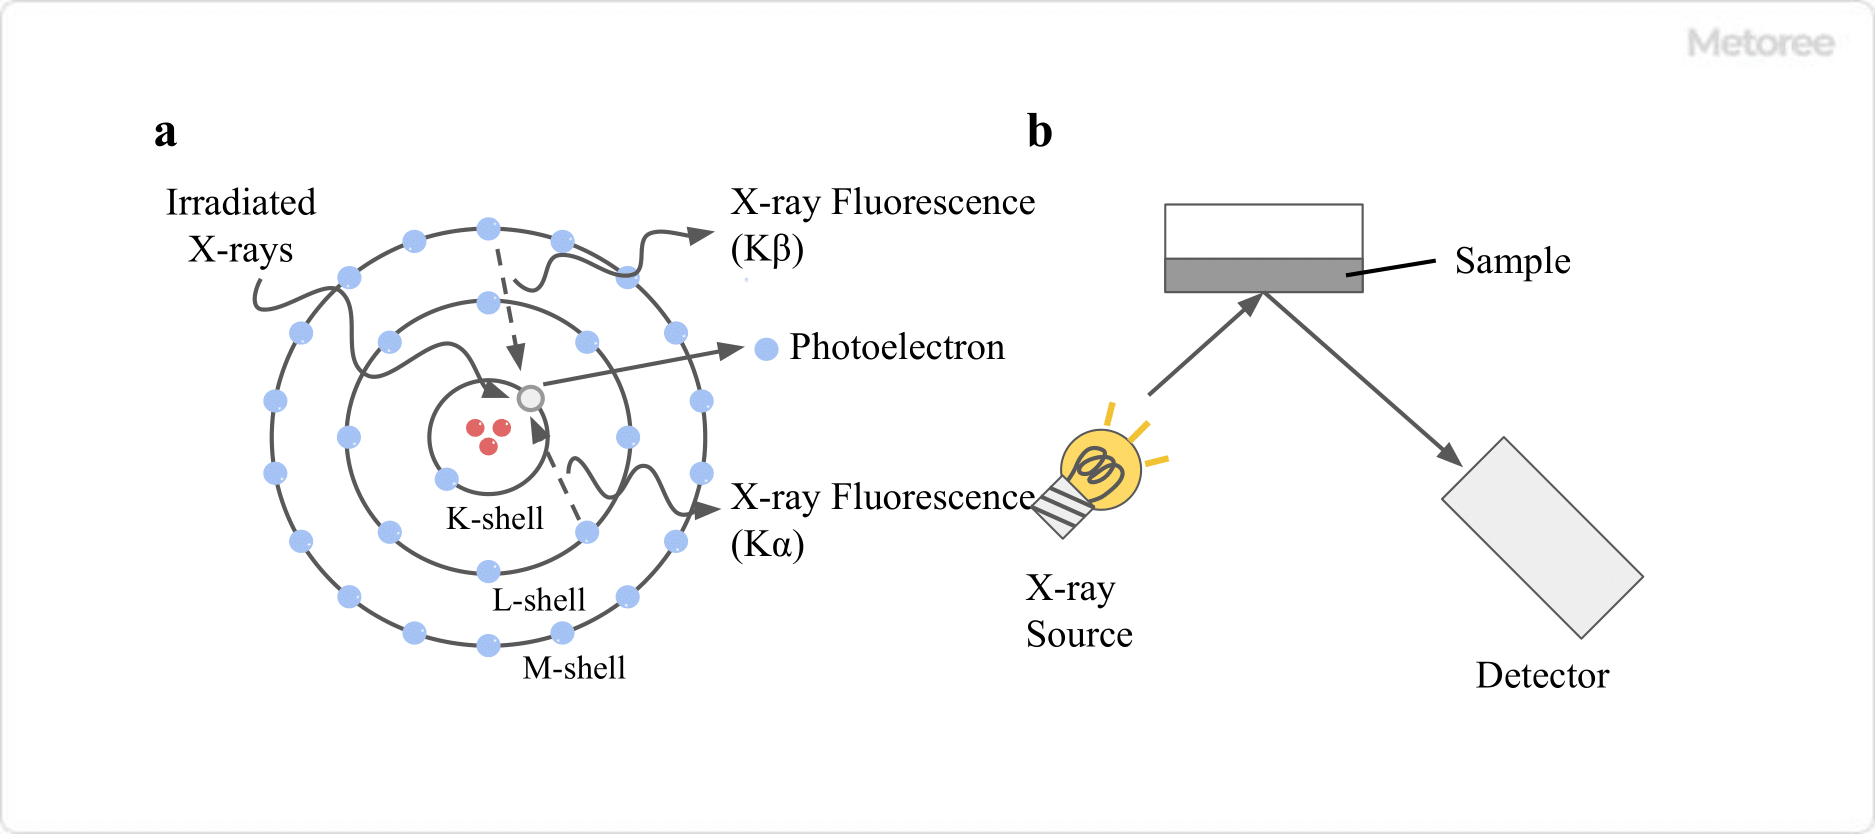 Figure 1. (a) Generation of X-ray fluorescence (b) Structure of the X-ray analyser